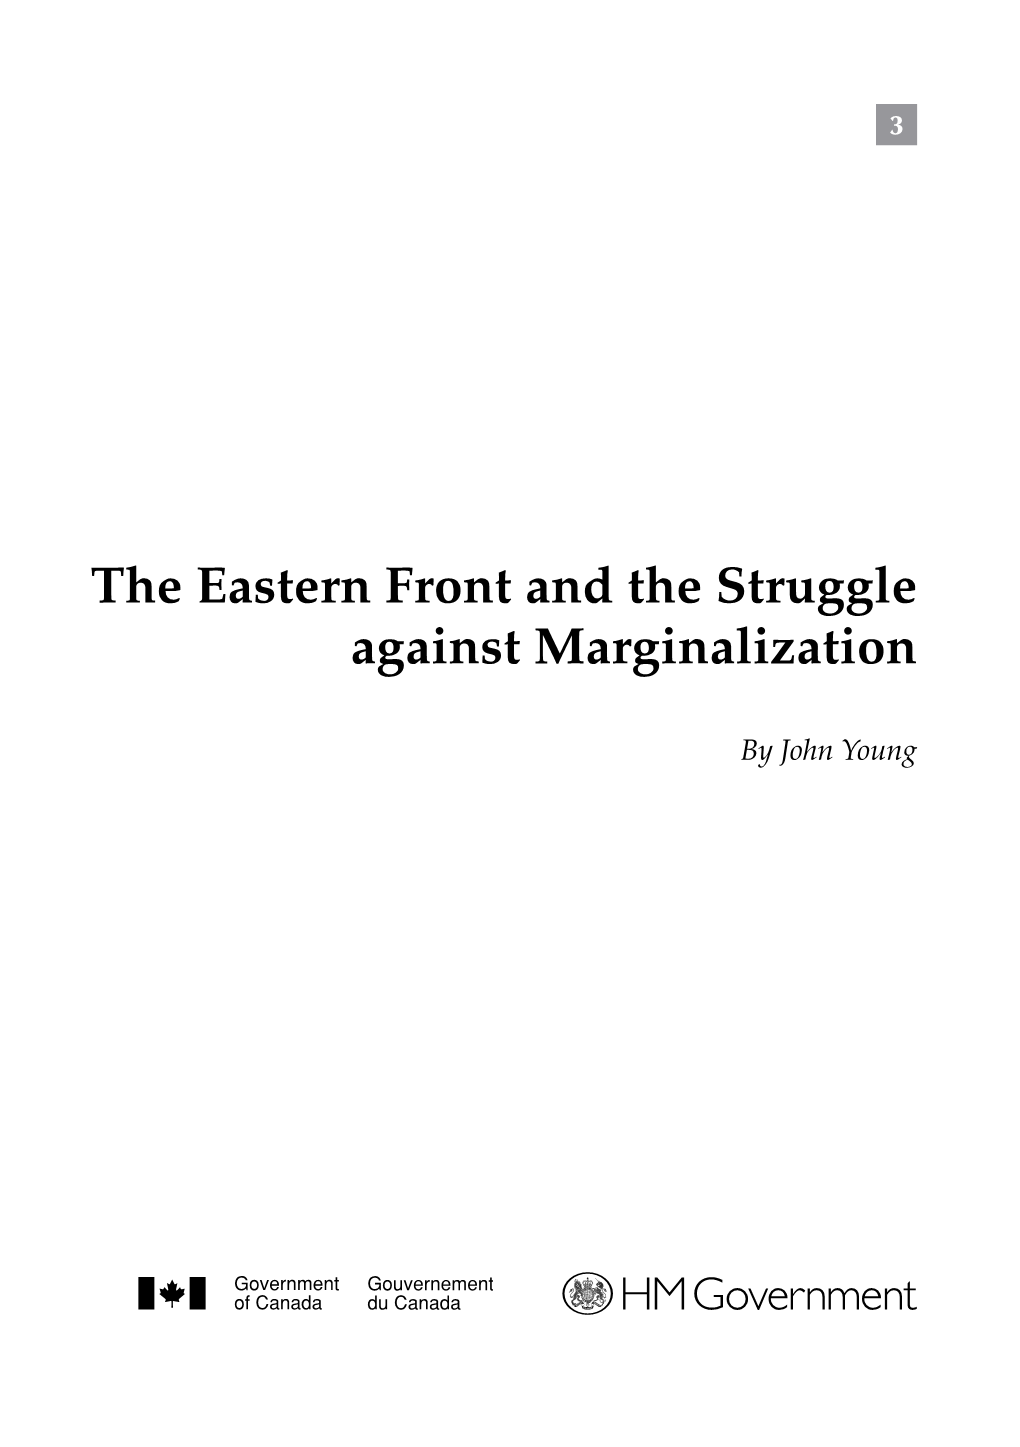 The Eastern Front and the Struggle Against Marginalization